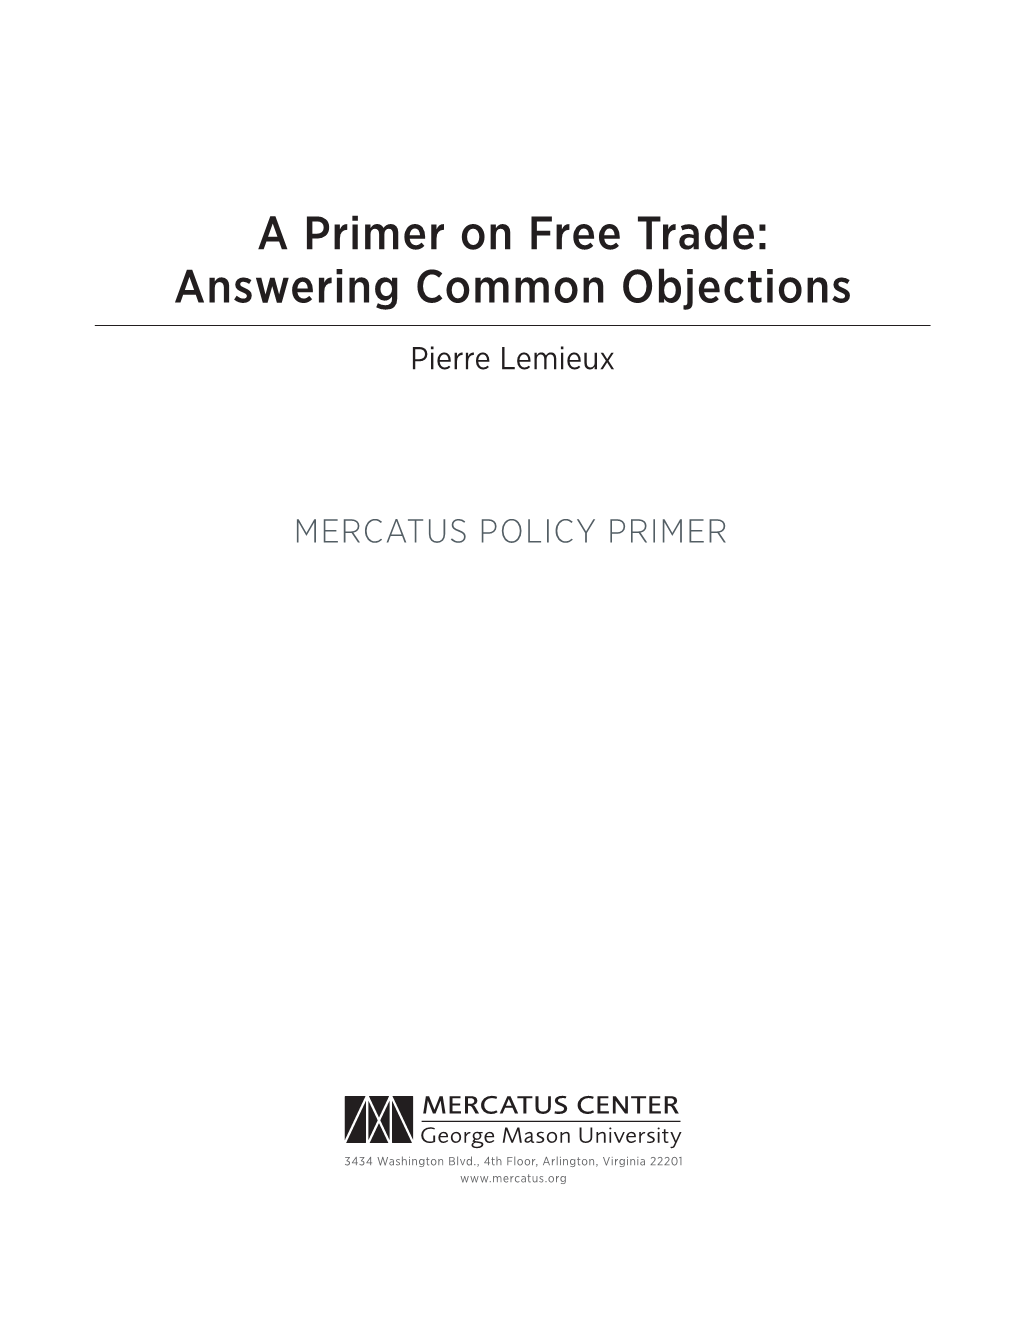 A Primer on Free Trade: Answering Common Objections Pierre Lemieux